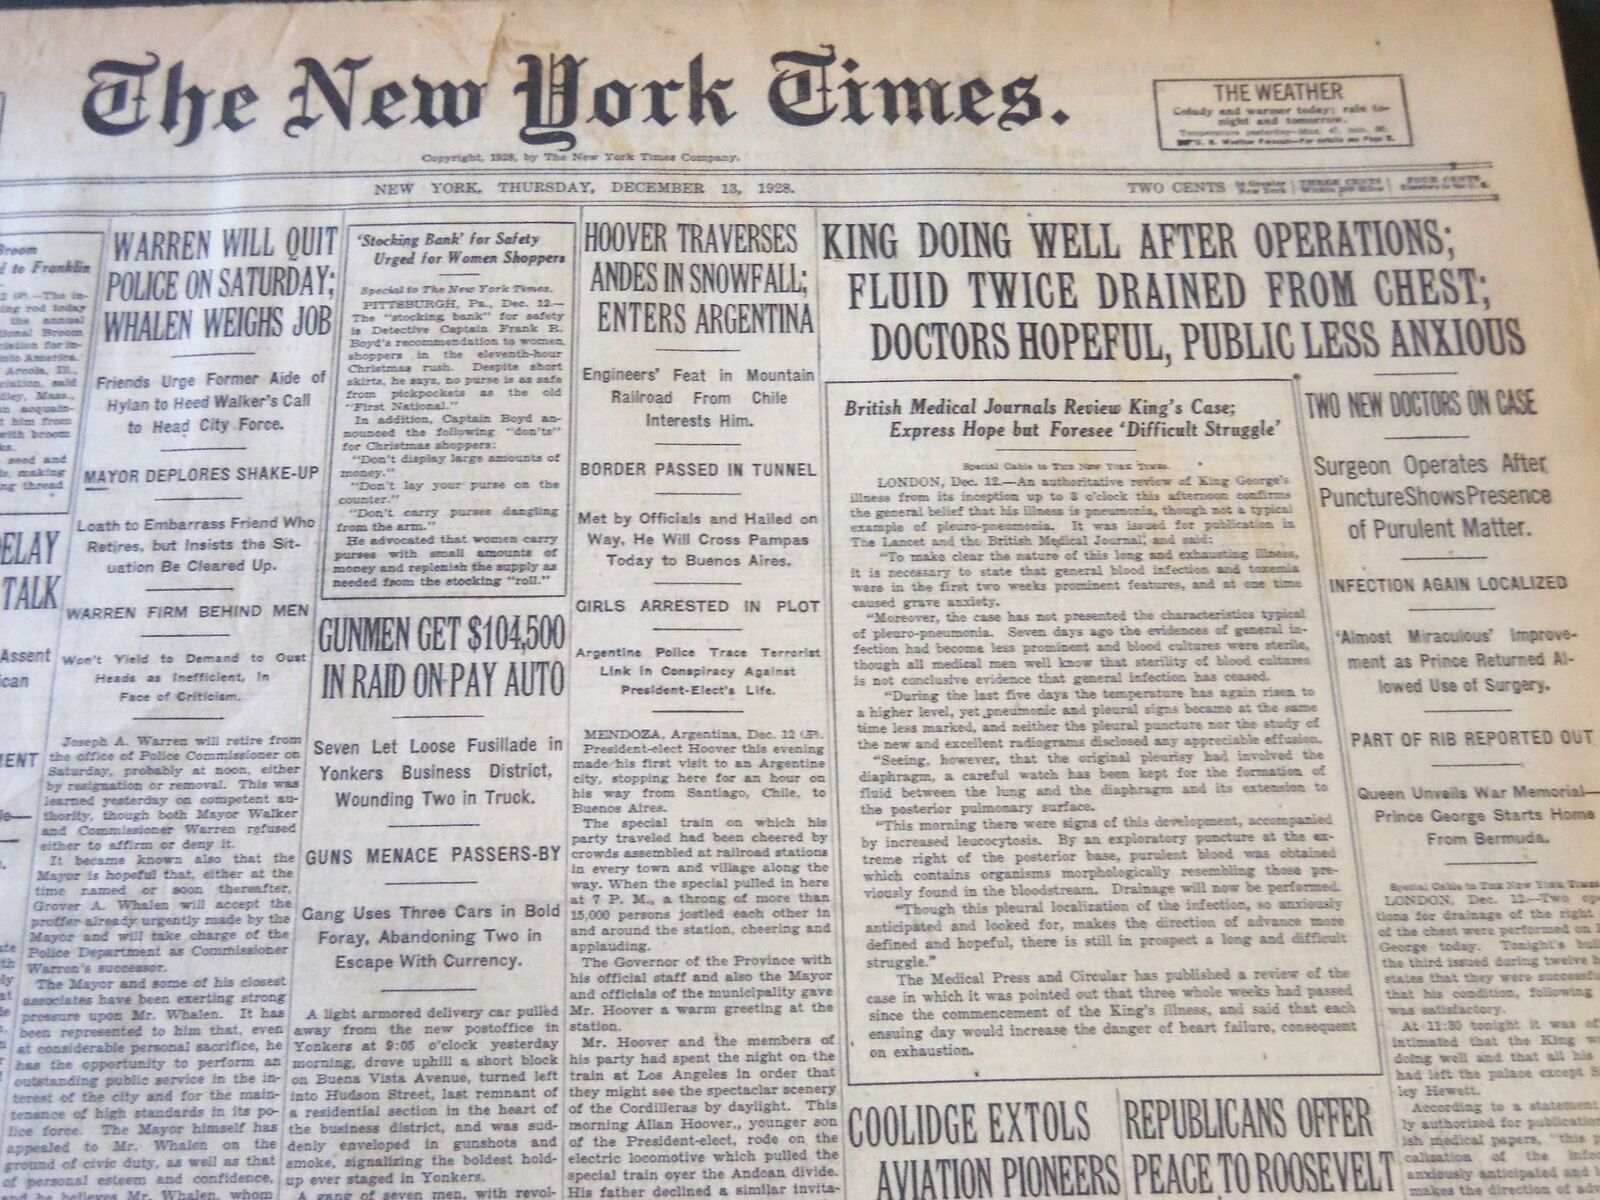 1928 DECEMBER 13 NEW YORK TIMES - KING DOIND WELL AFTER OPERATIONS - NT 6511